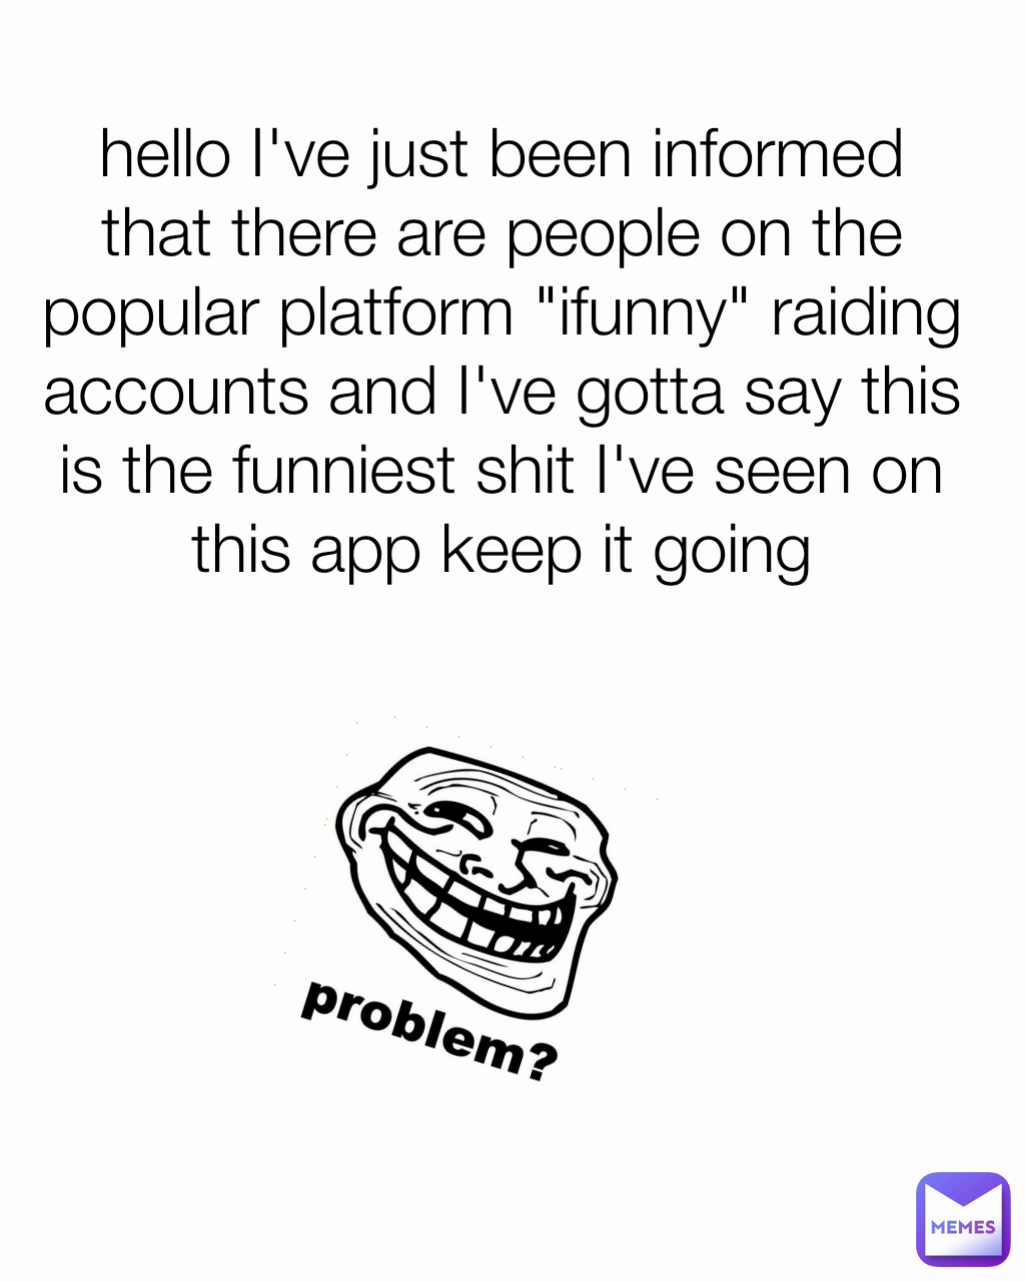 hello I've just been informed that there are people on the popular platform "ifunny" raiding accounts and I've gotta say this is the funniest shit I've seen on this app keep it going